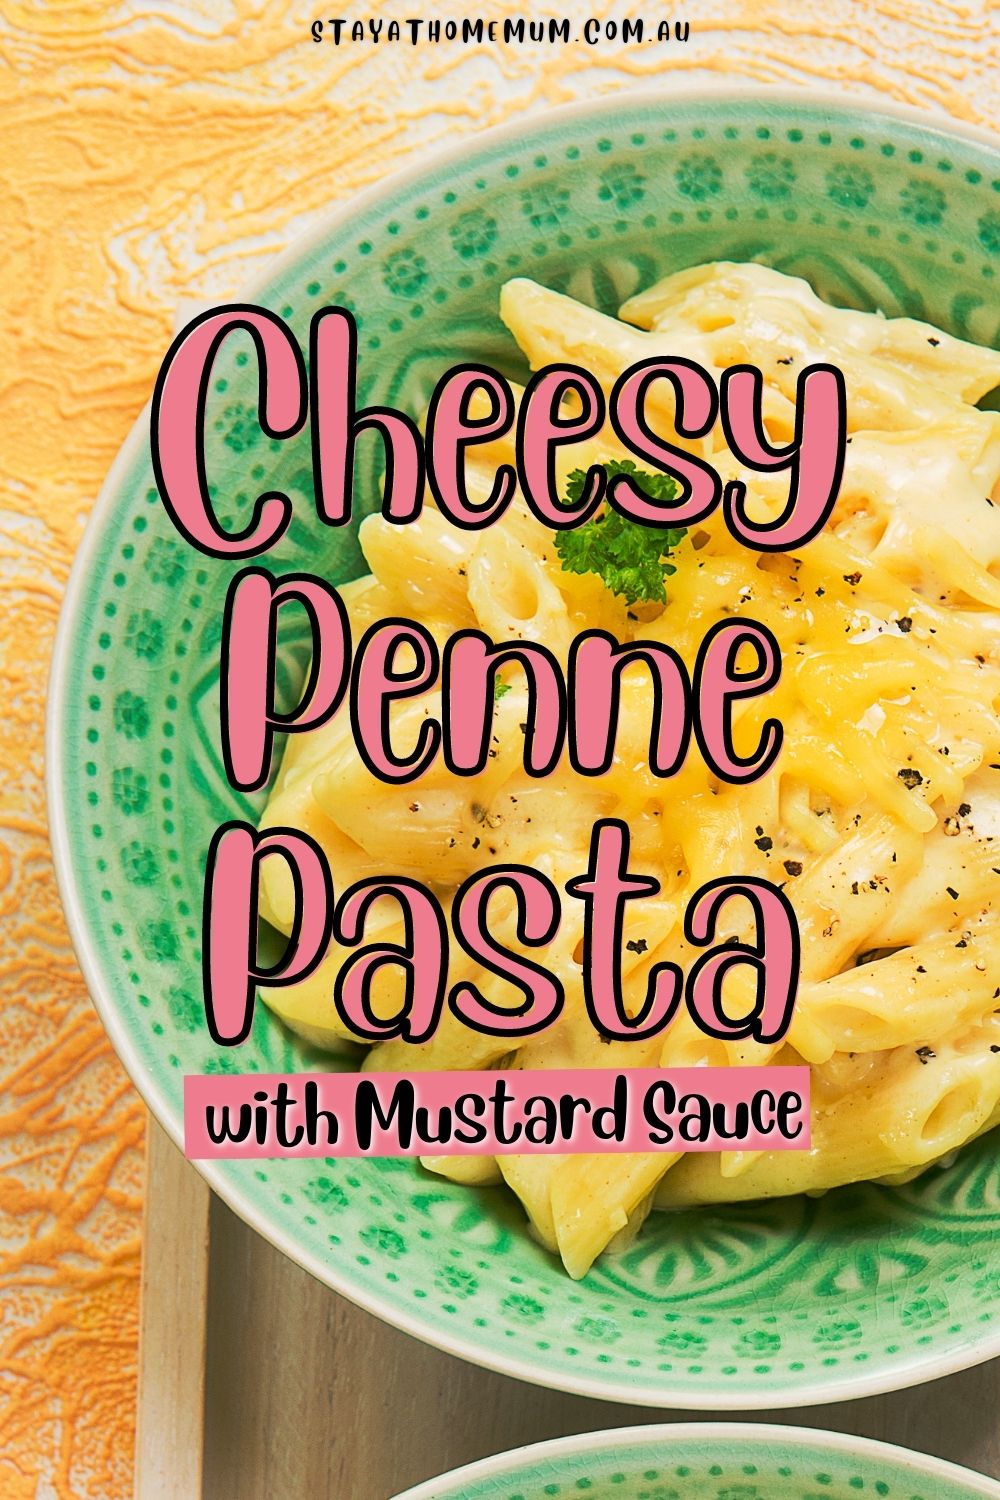 Cheesy Penne Pasta with Mustard Sauce Pinnable